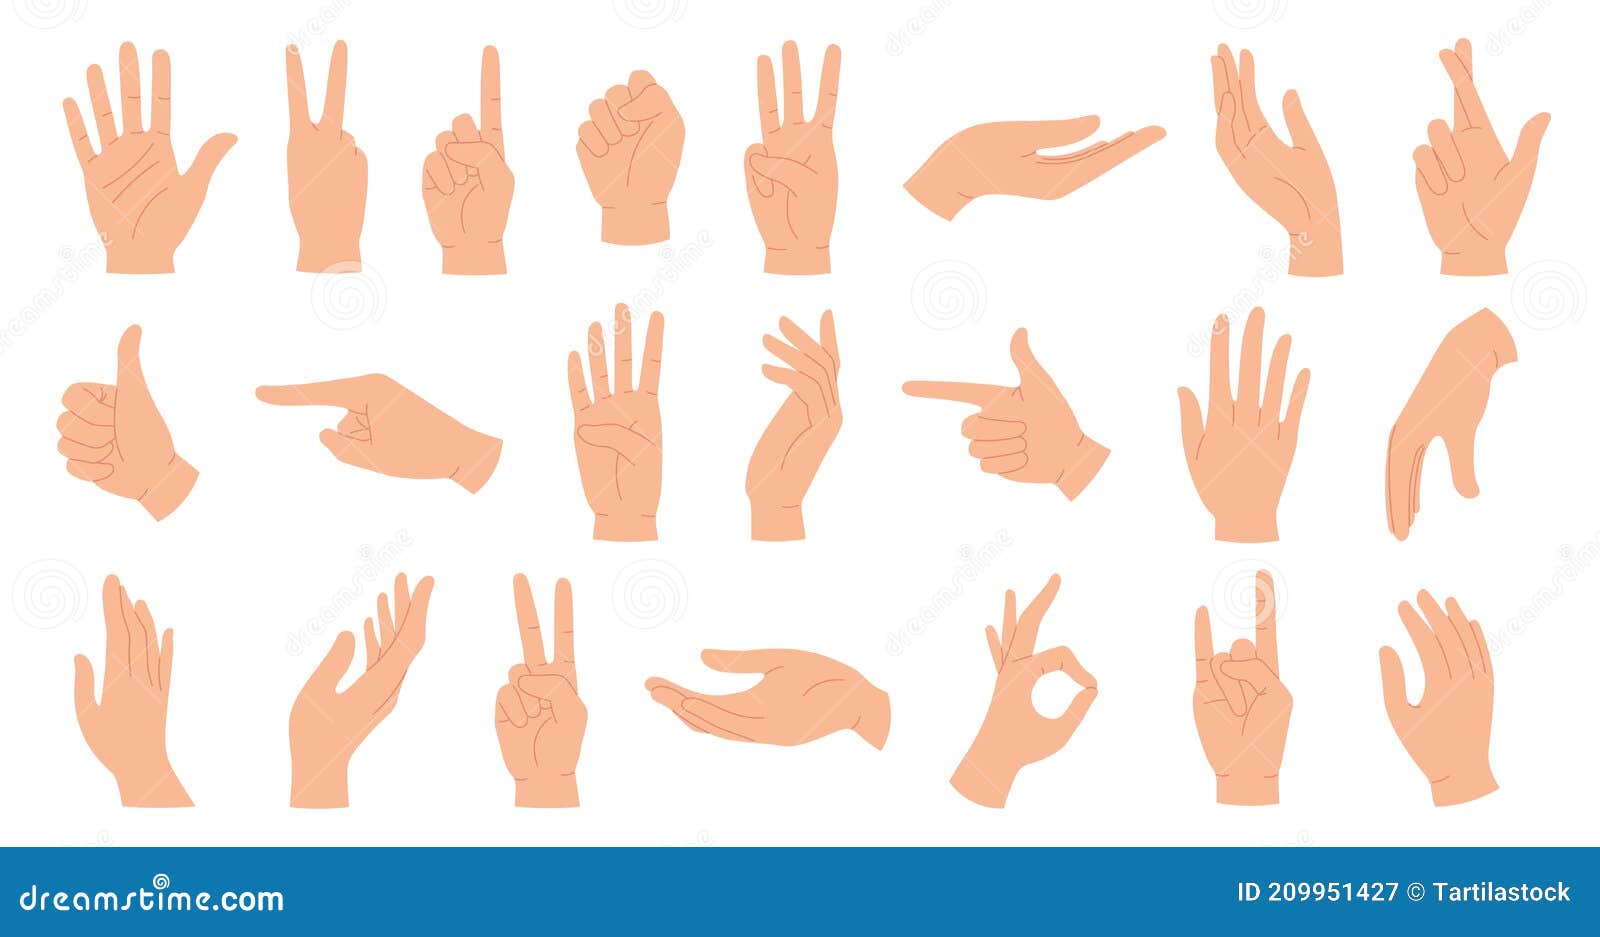 hands poses. female hand holding and pointing gestures, fingers crossed, fist, peace and thumb up. cartoon human palms